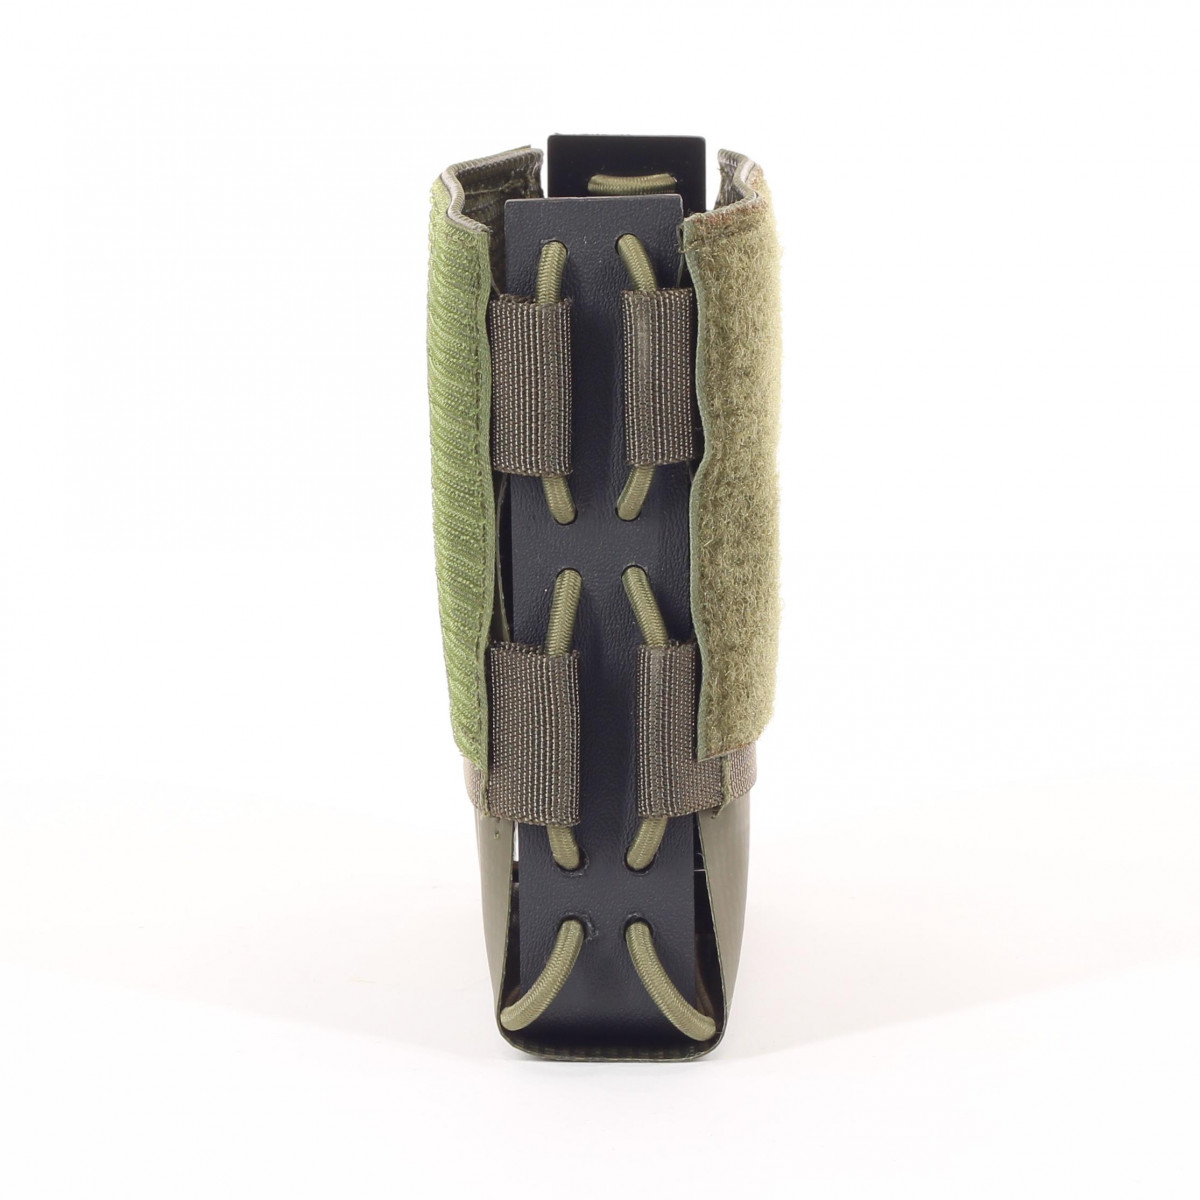 Quick-draw magazine pouch G28 Velcro in olive